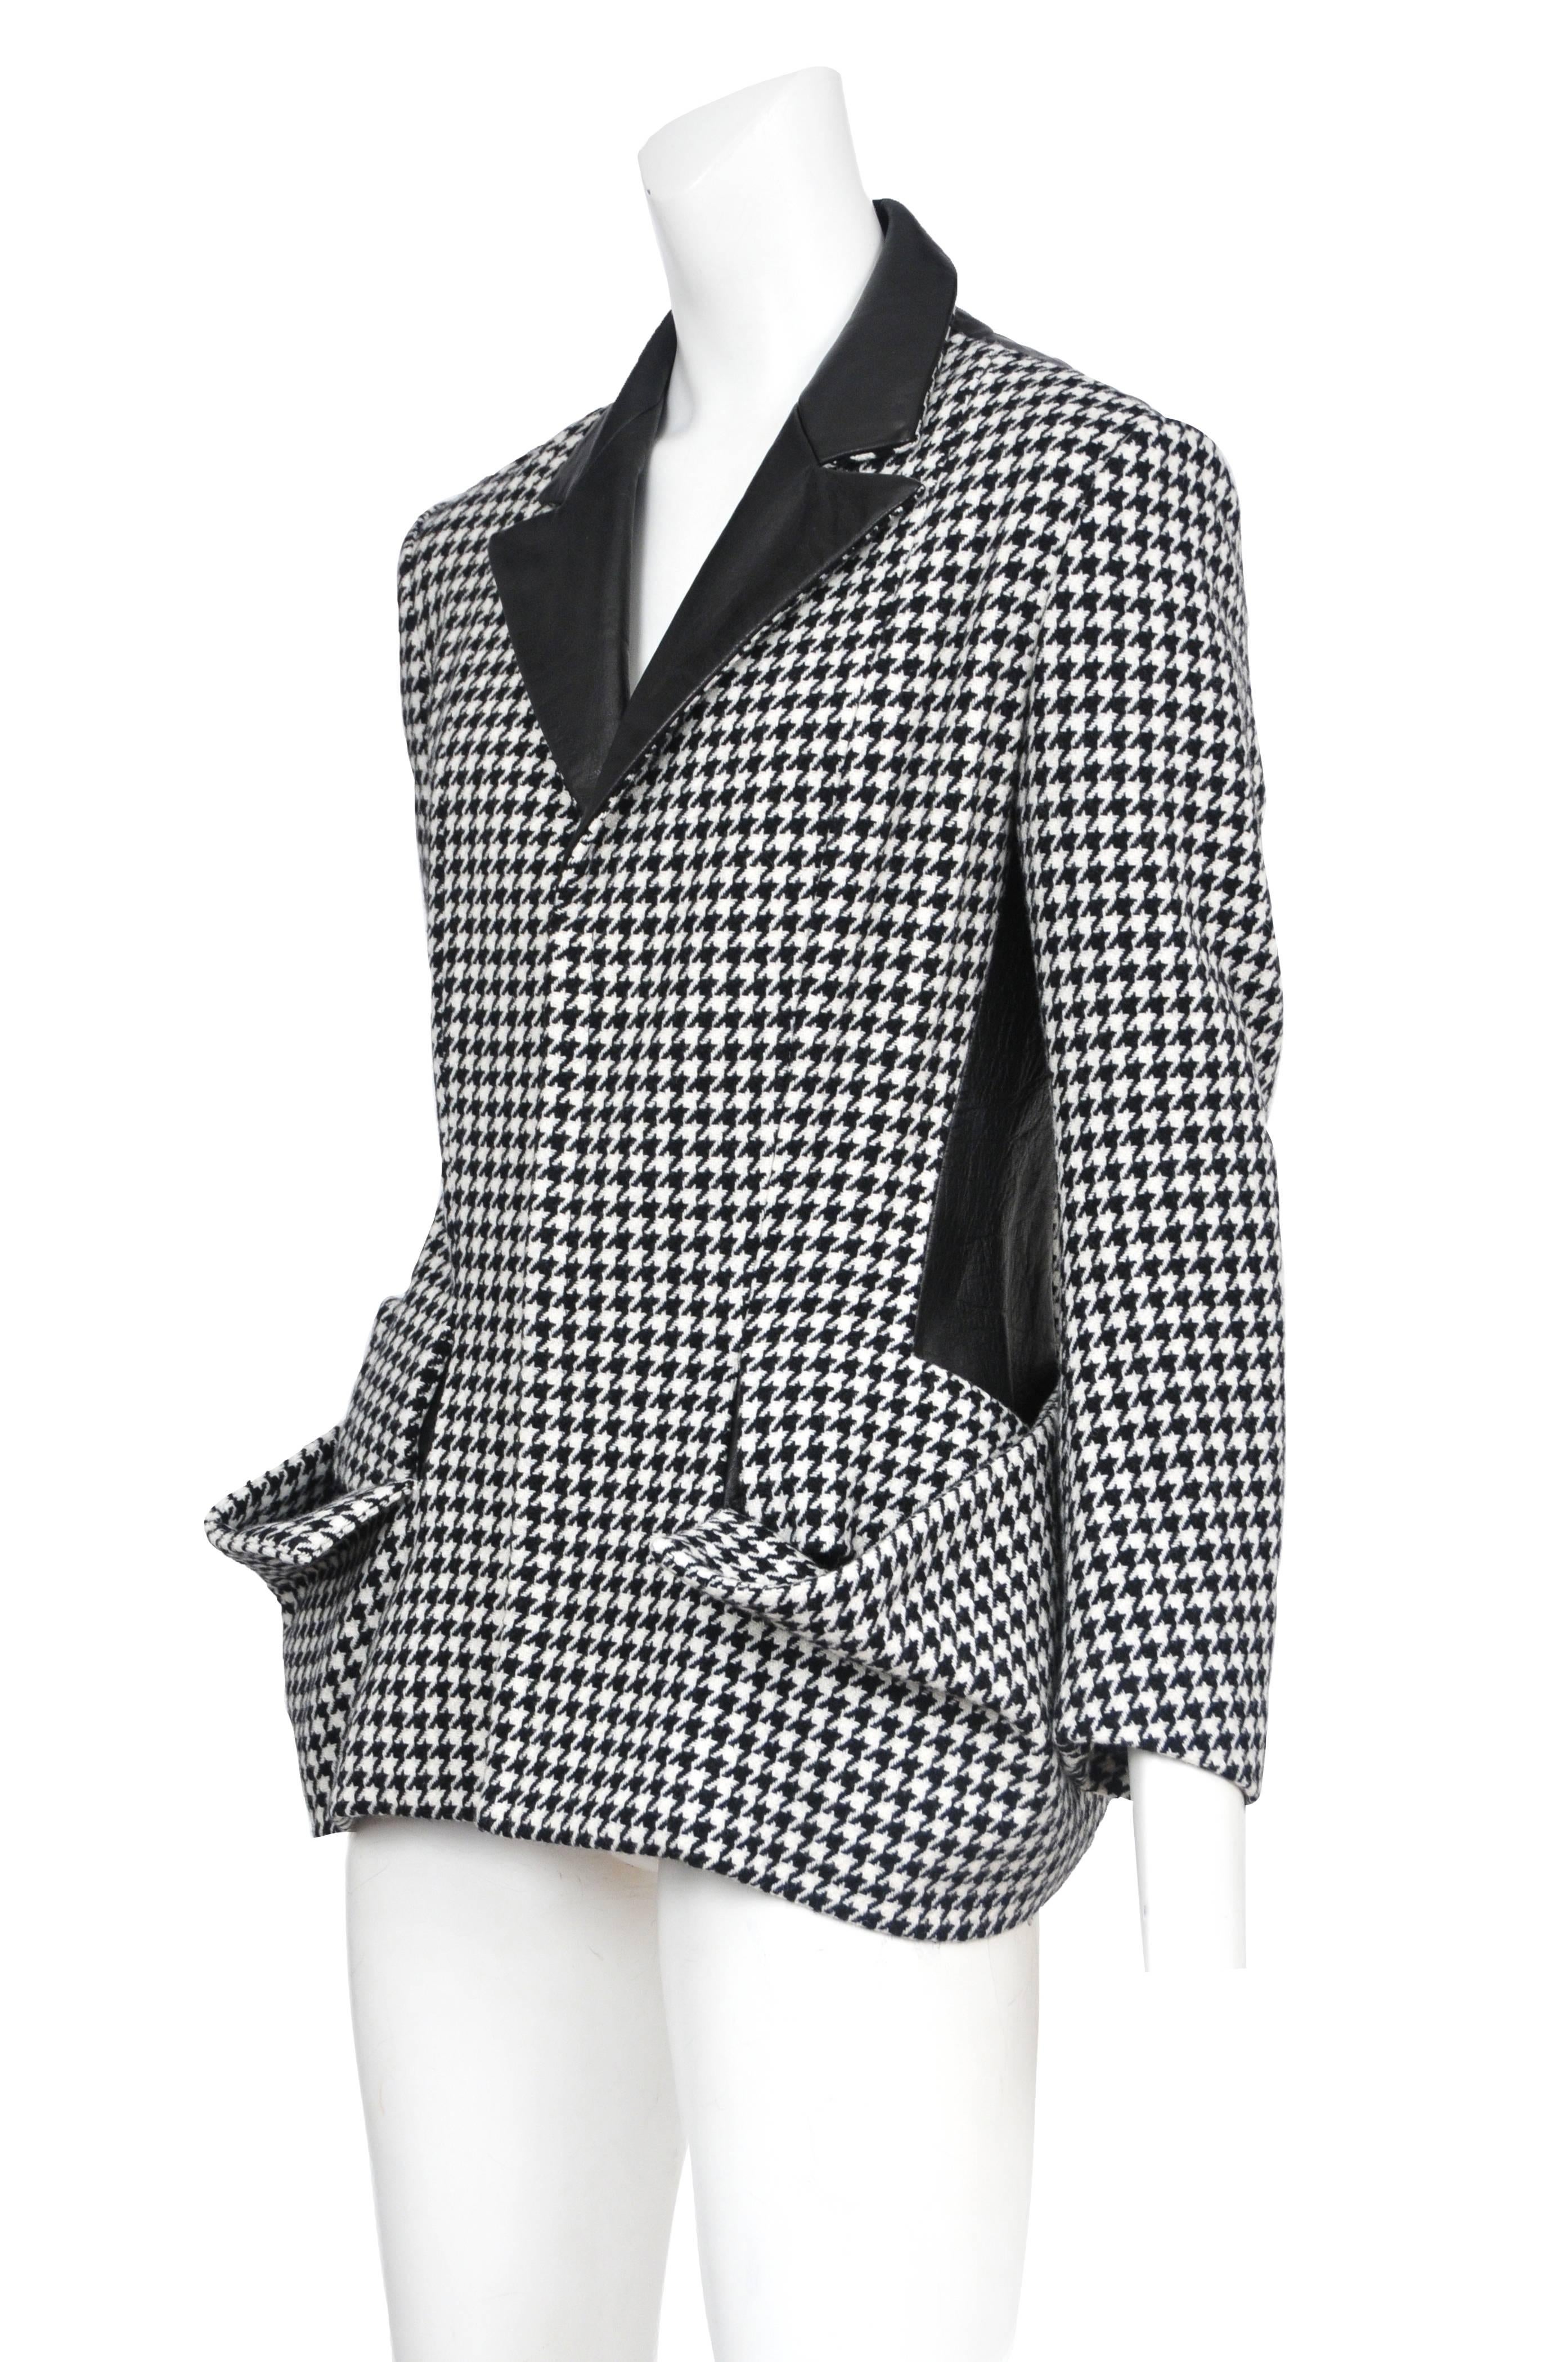 Vintage Yohji Yamamoto jacket featuring a woven wool houndstooth pattern, loosely draped pockets and leather collar.